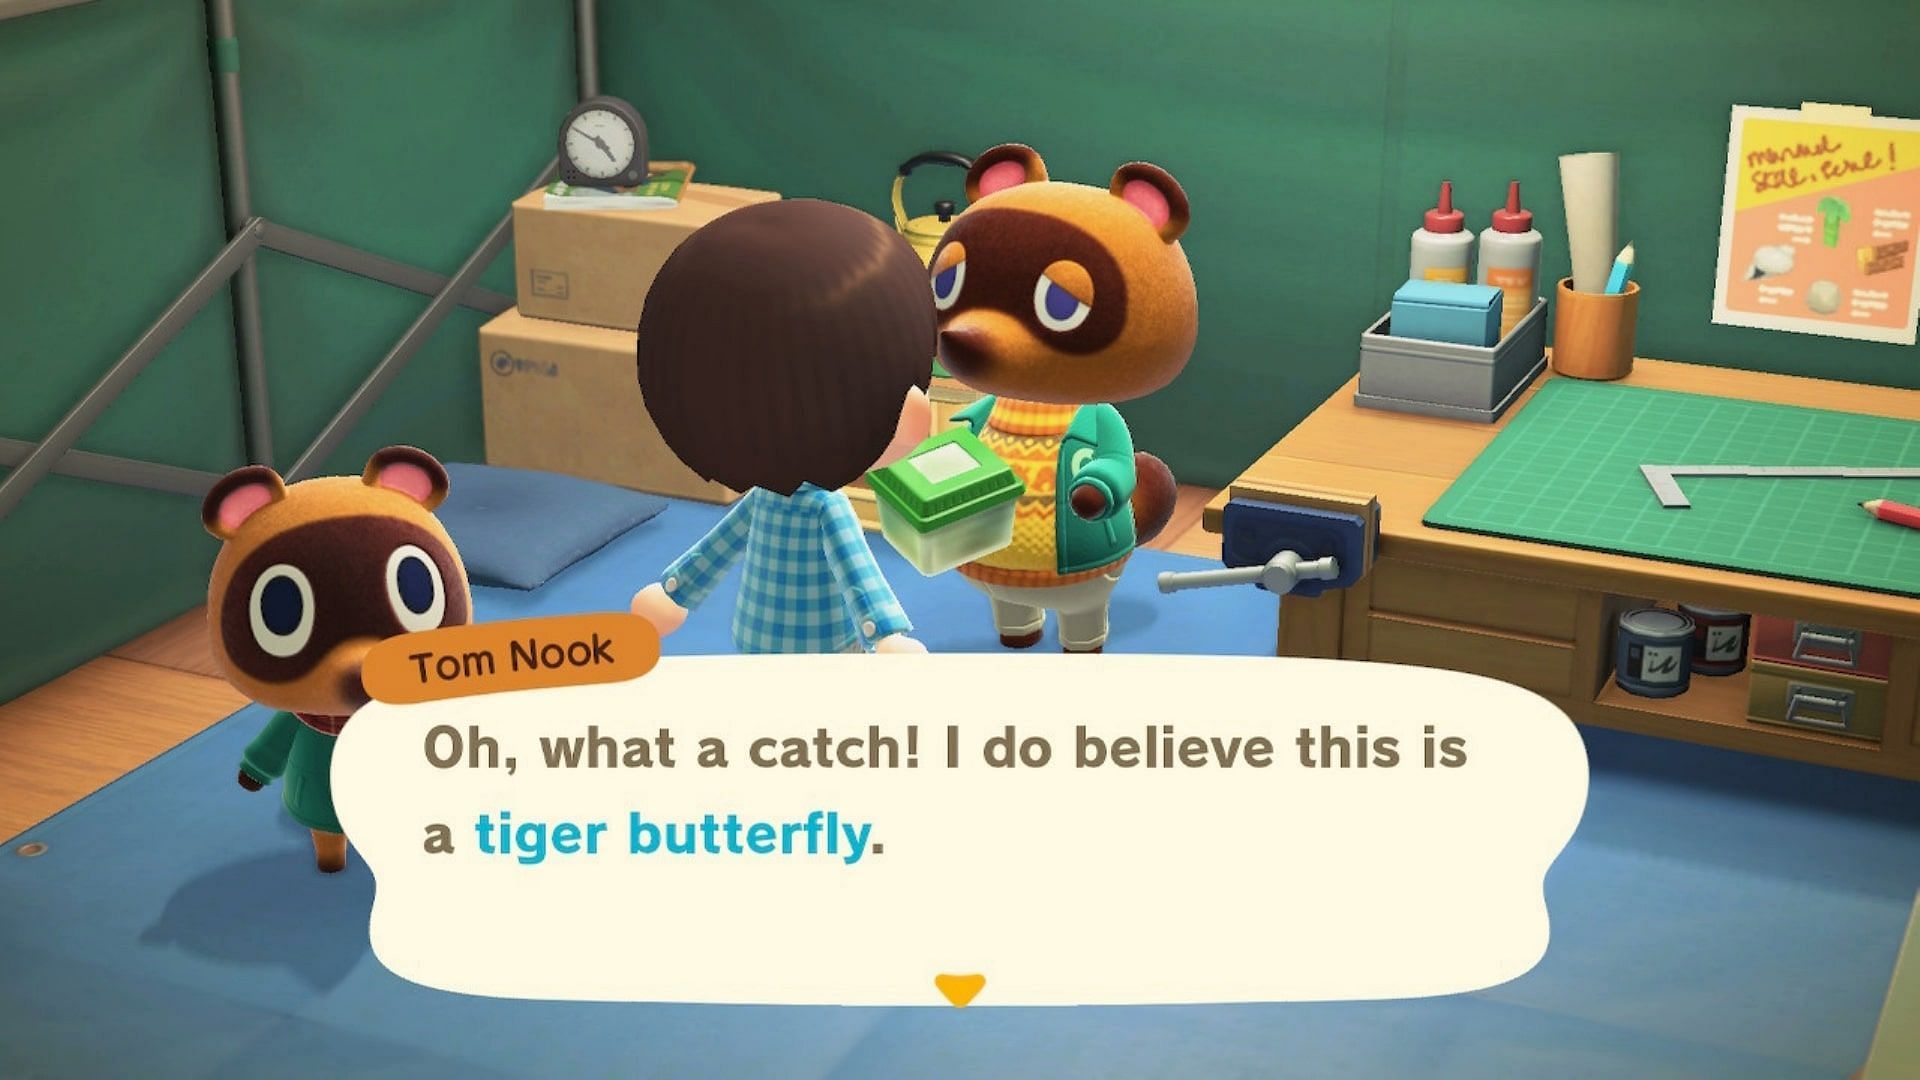 Animal Crossing: New Horizons allows players to either donate or sell items in the game (Image via Nintendo)